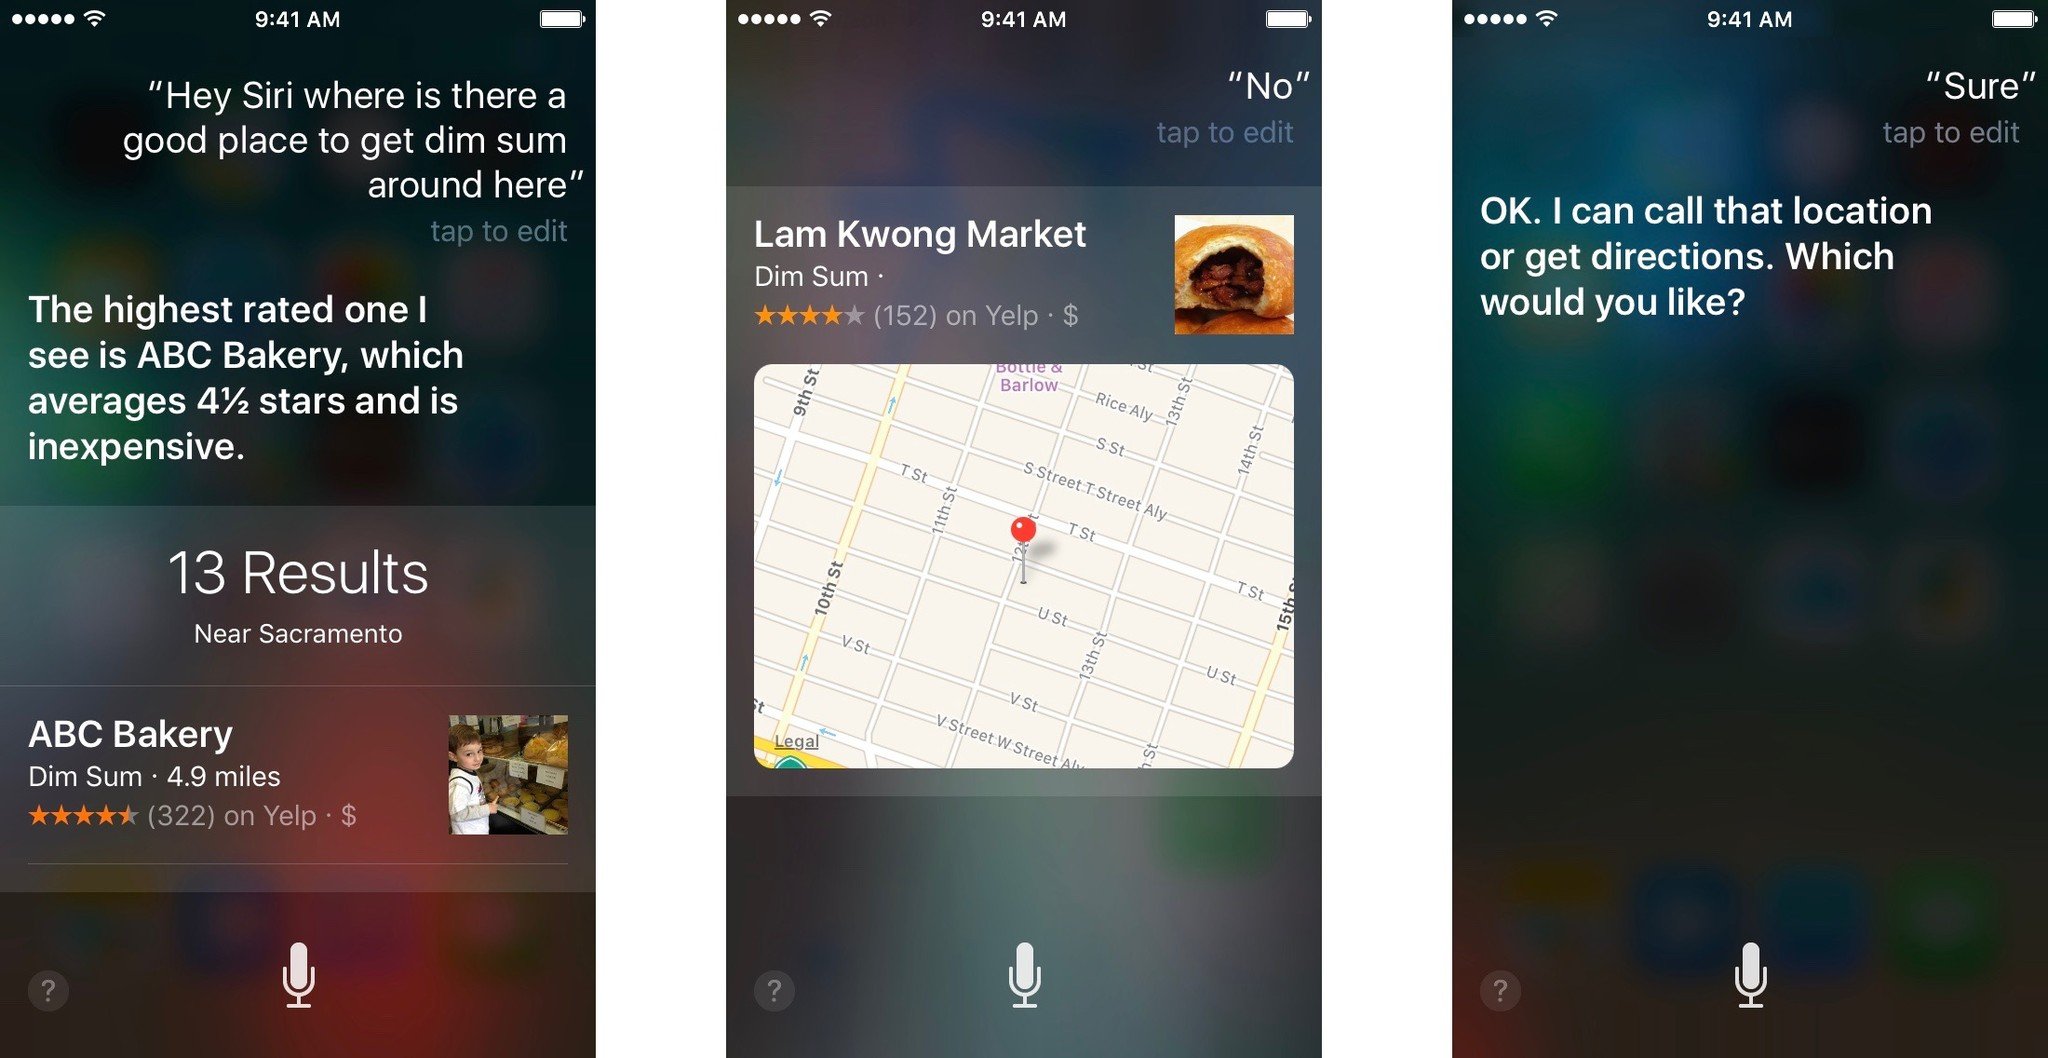 Say, Hey Siri and get suggestions for the best location in your search